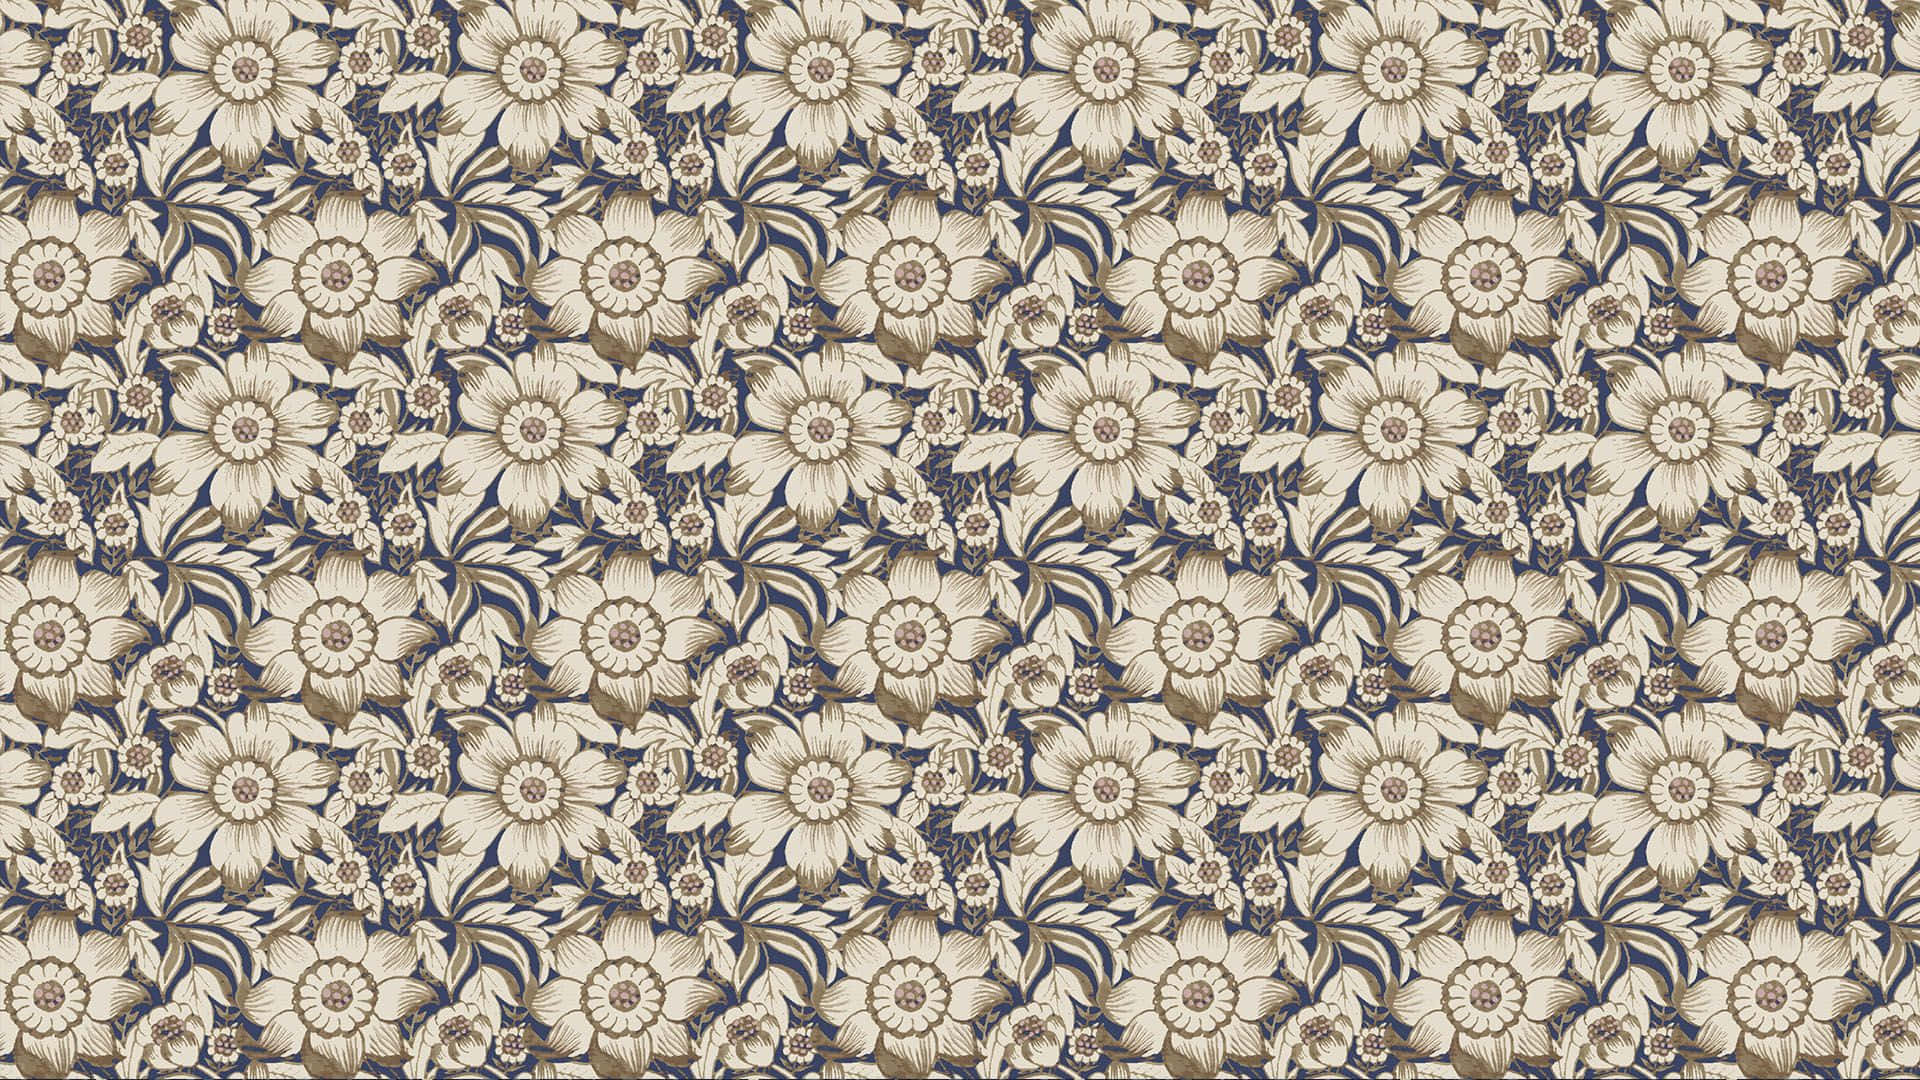 Instantly Liven Up Your Desktop with Unique Patterns Wallpaper